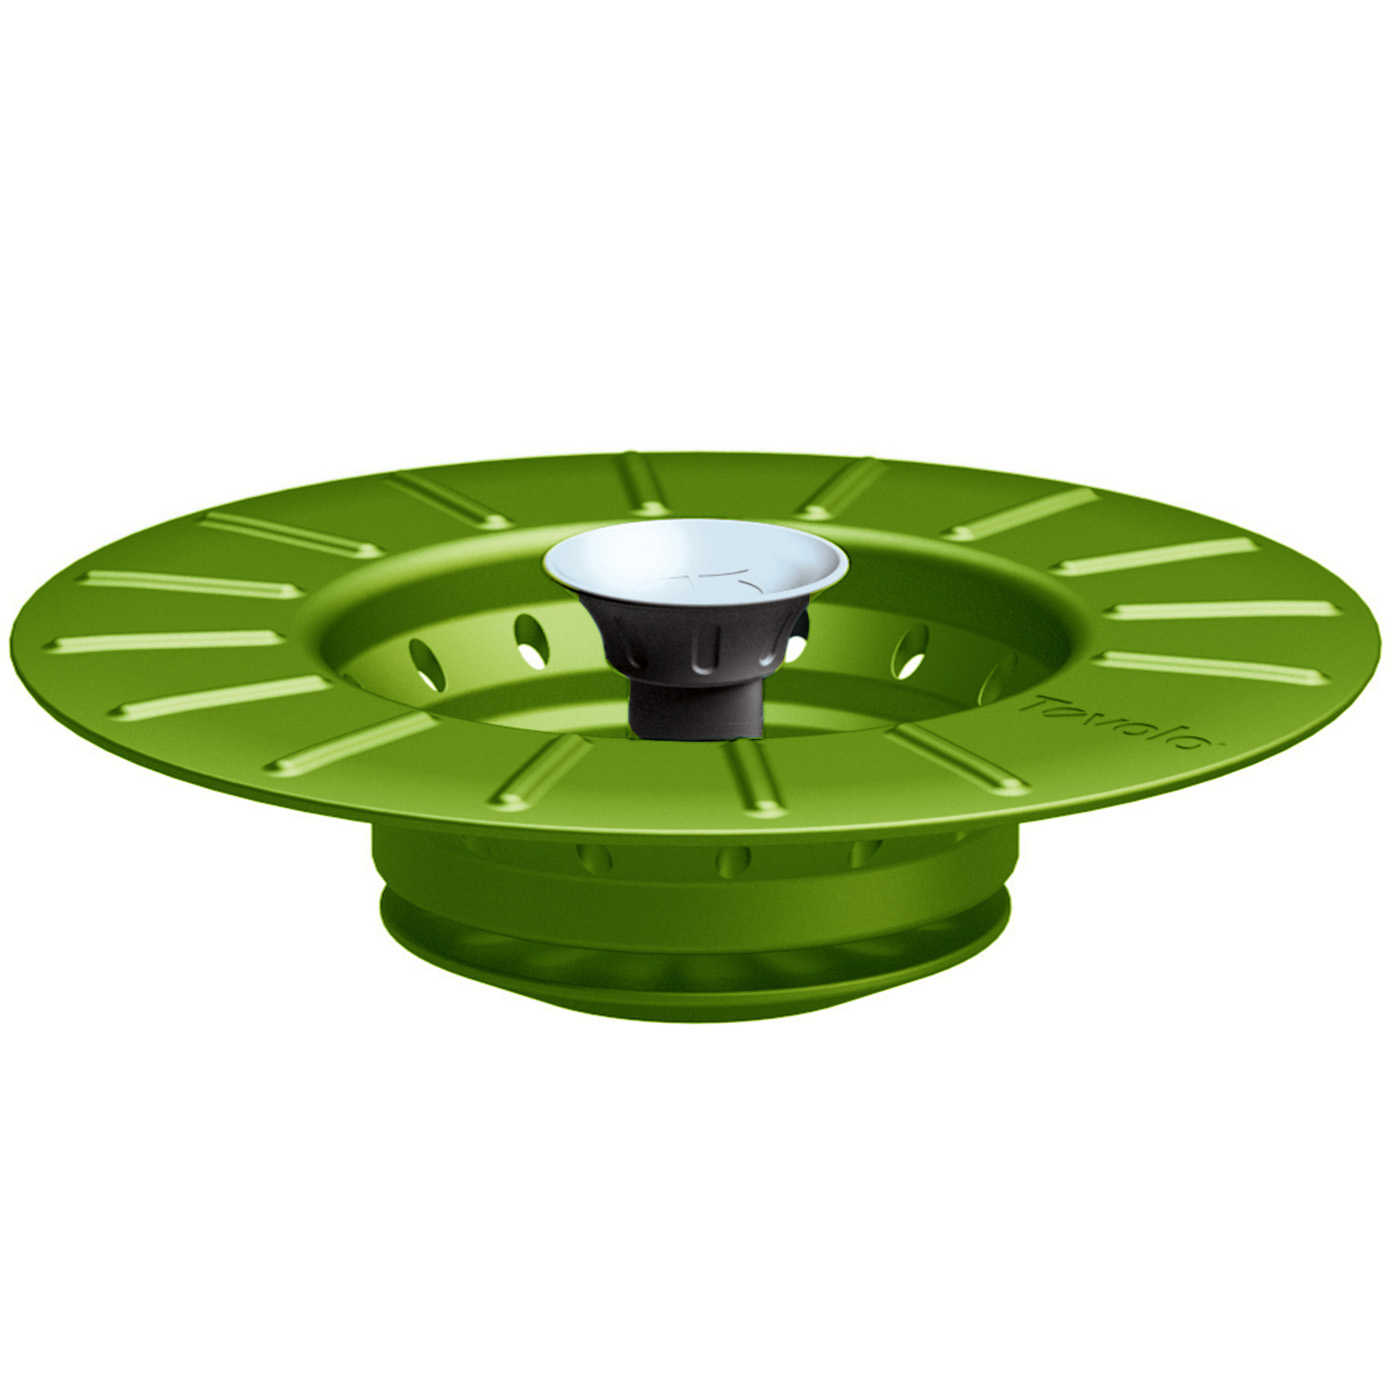 Tovolo Collapsible Sink Stopper & Strainer, Spring Green